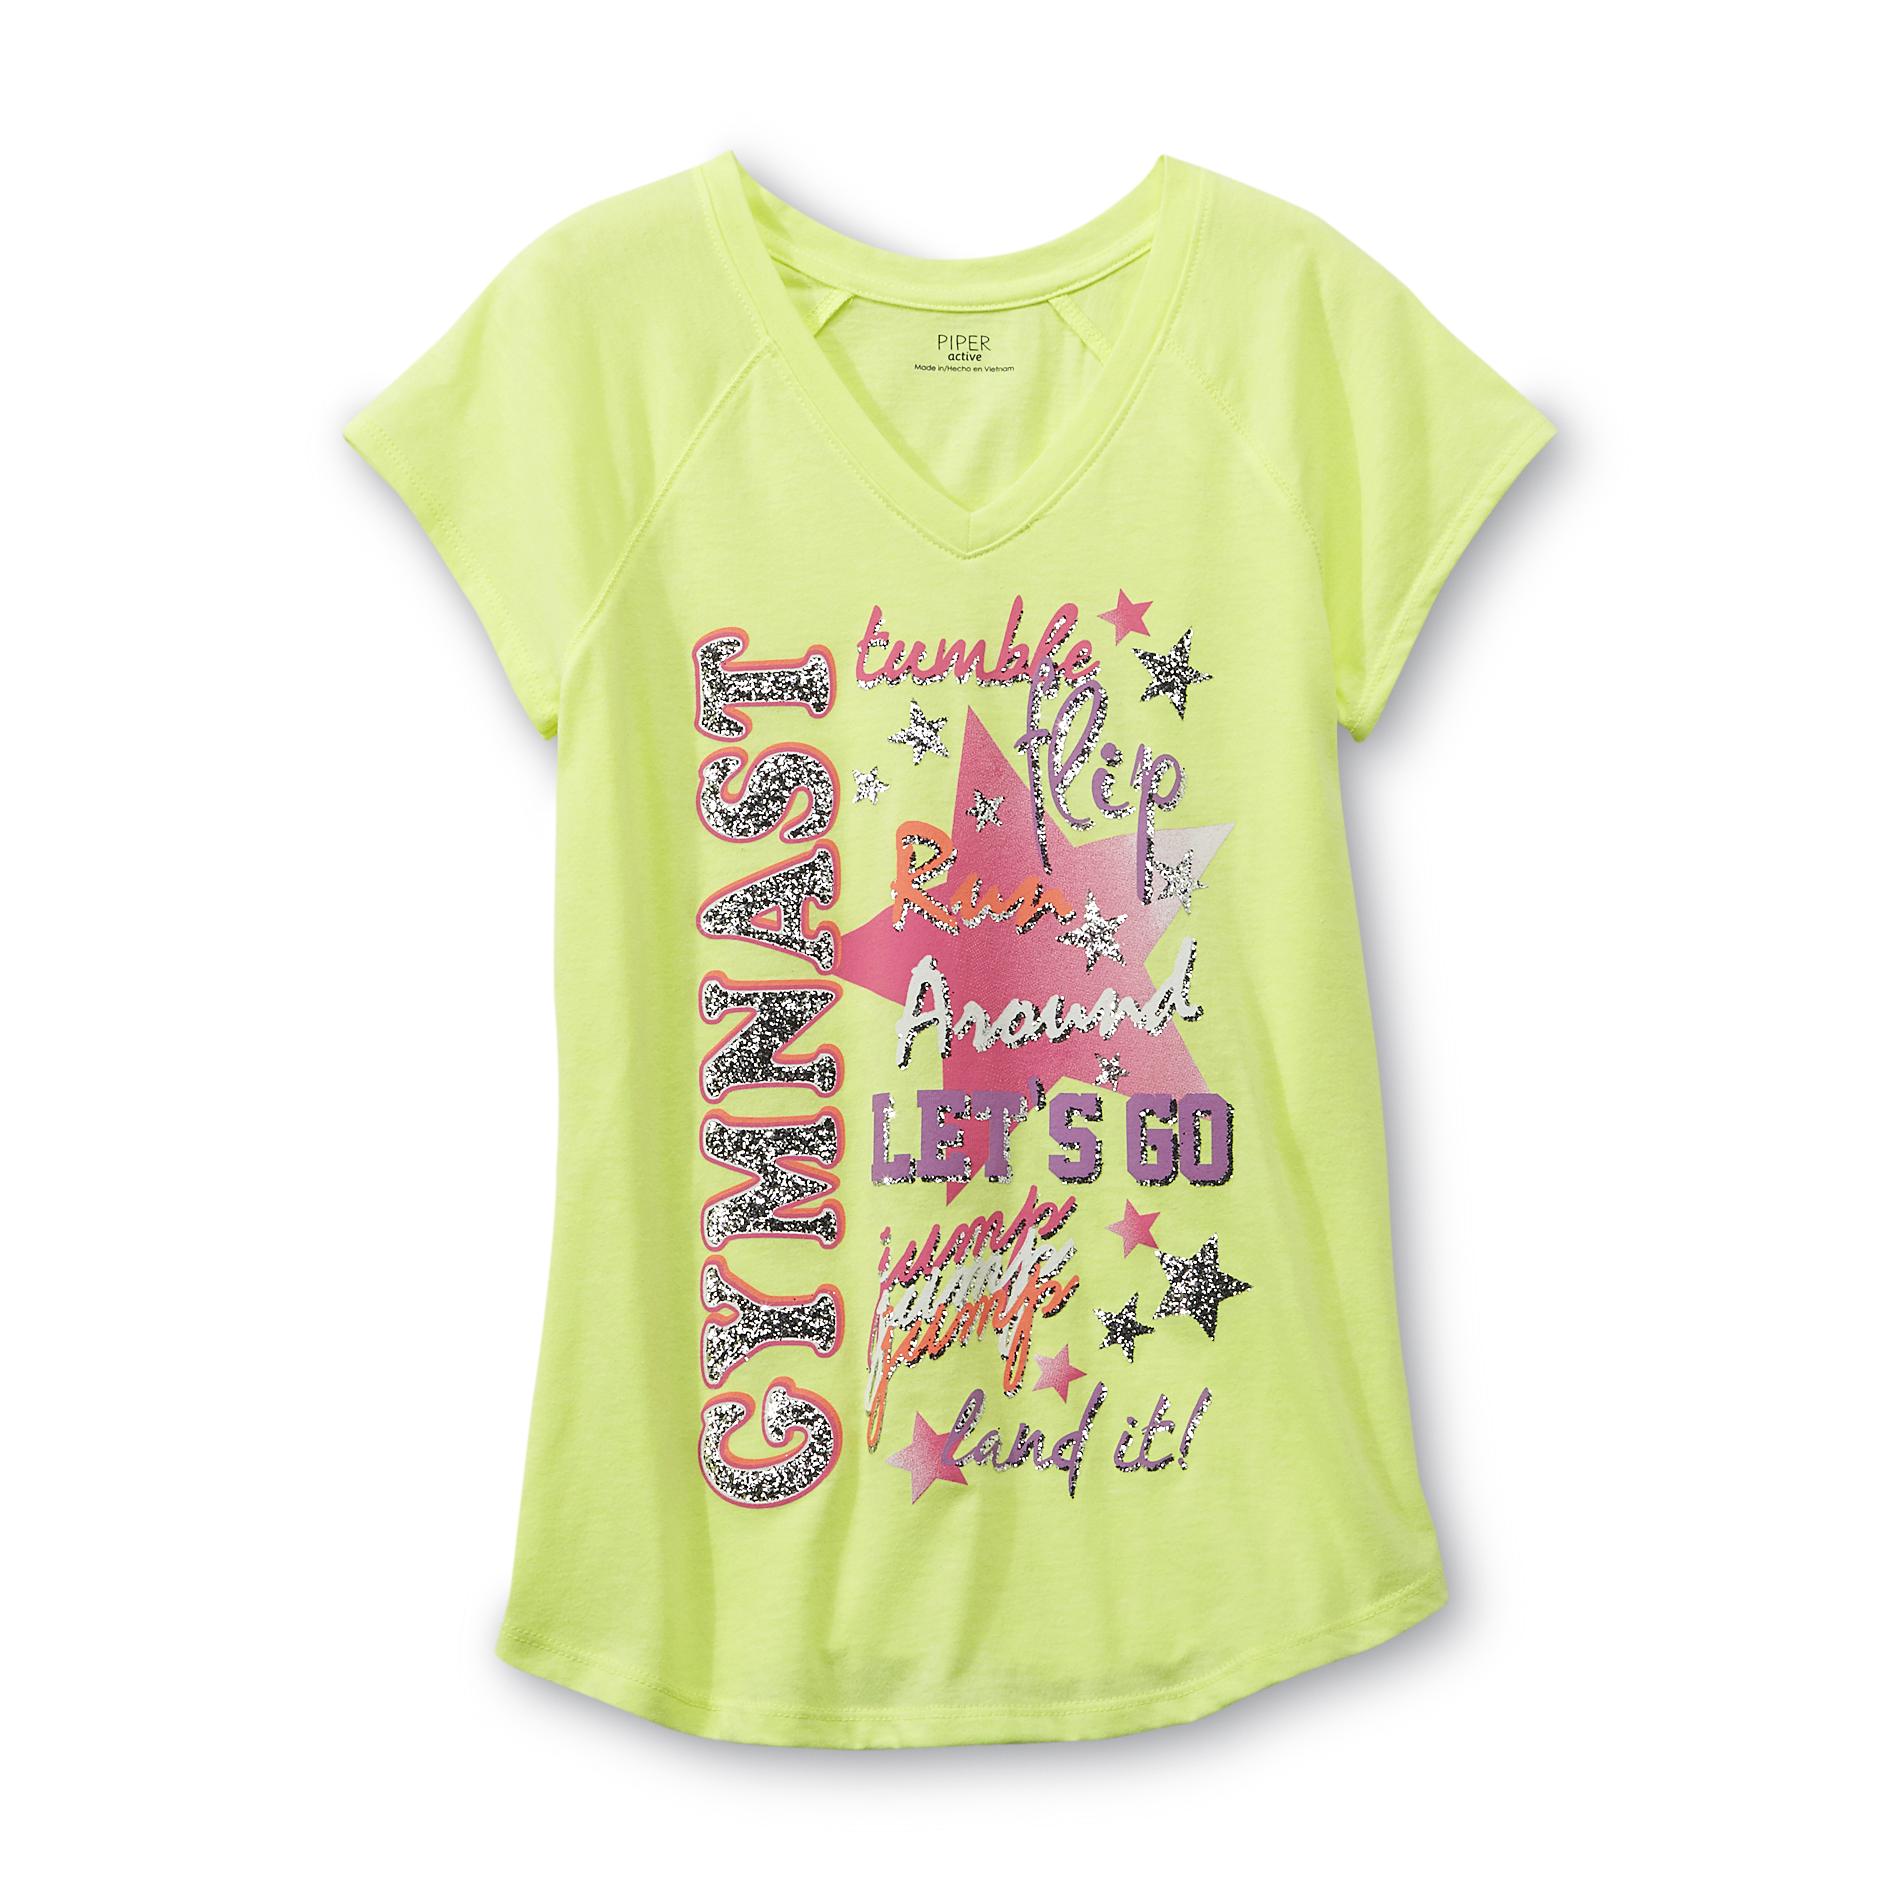 Piper Active Girl's Graphic T-Shirt - Gymnast